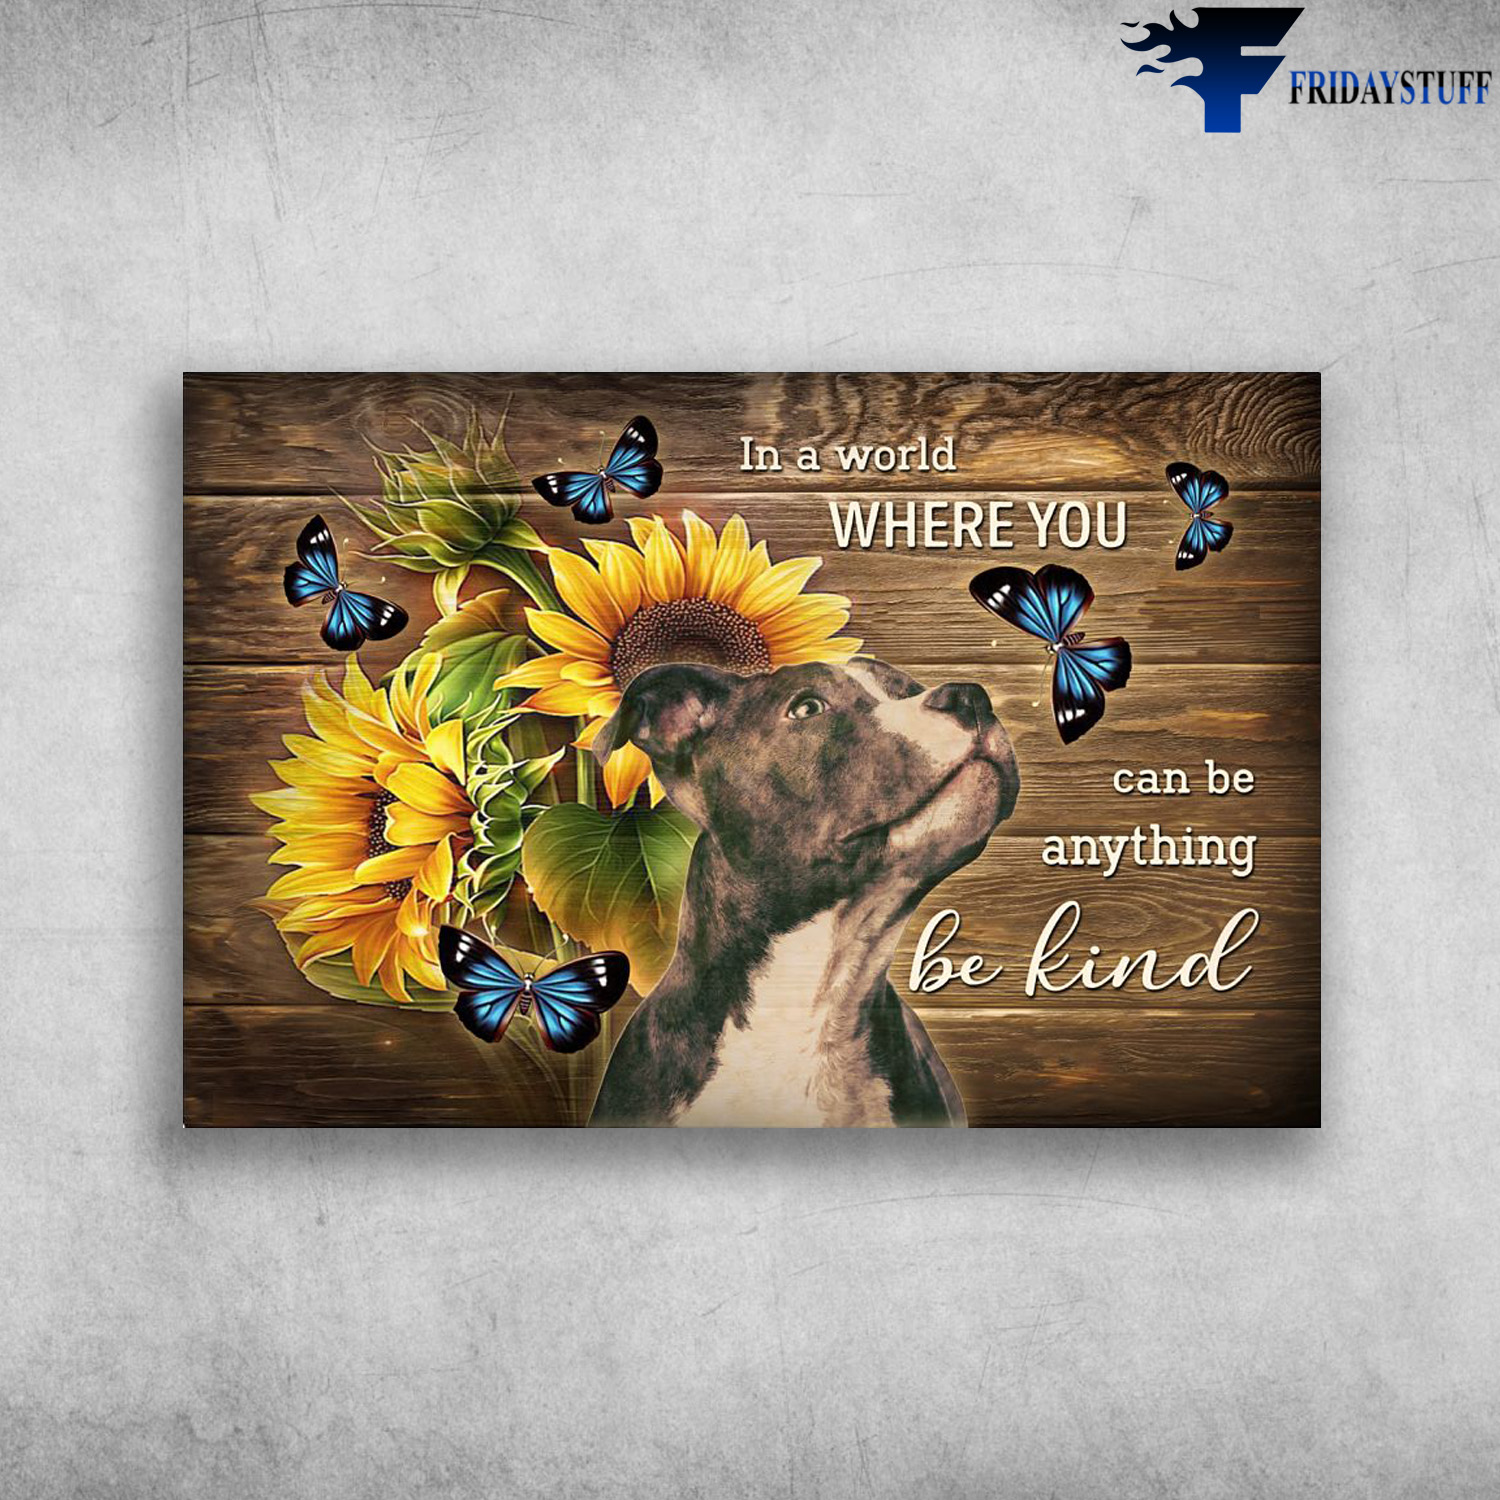 Pitbull With Butterfly And Sunflower - In A World, Where You Can Be Anything, Be Kind